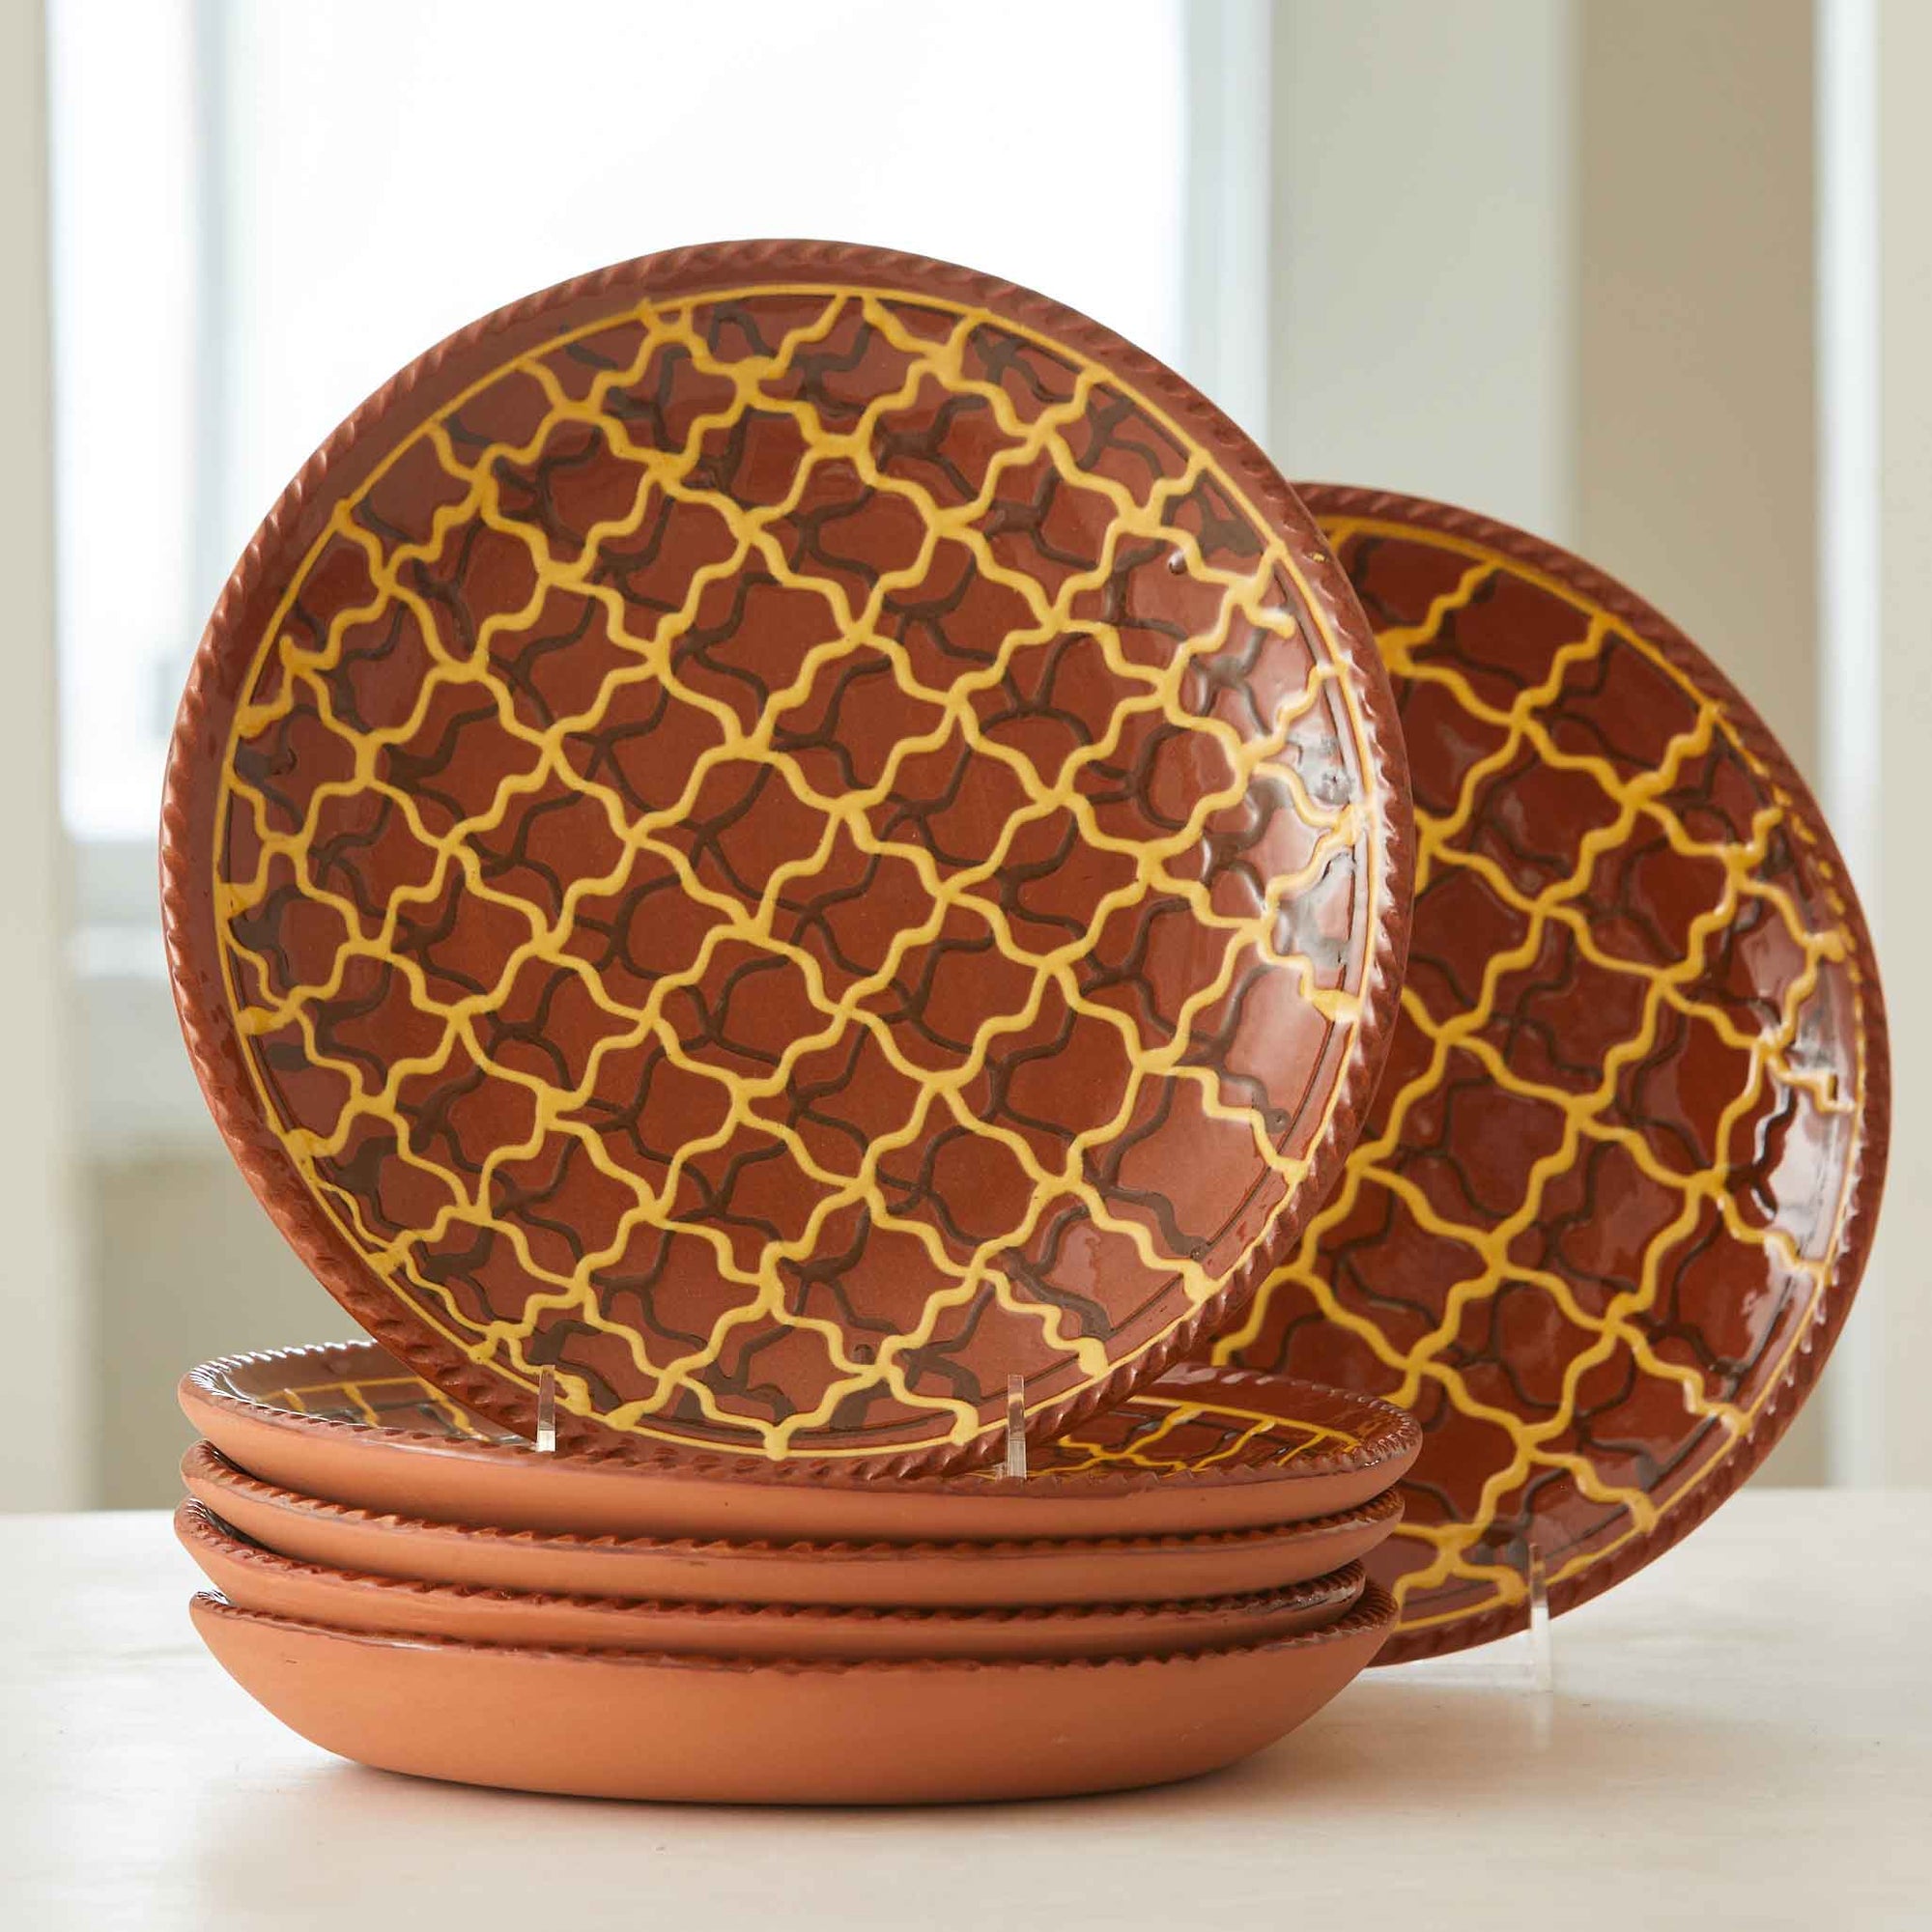 LIMITED EDITION REDWARE PLATES